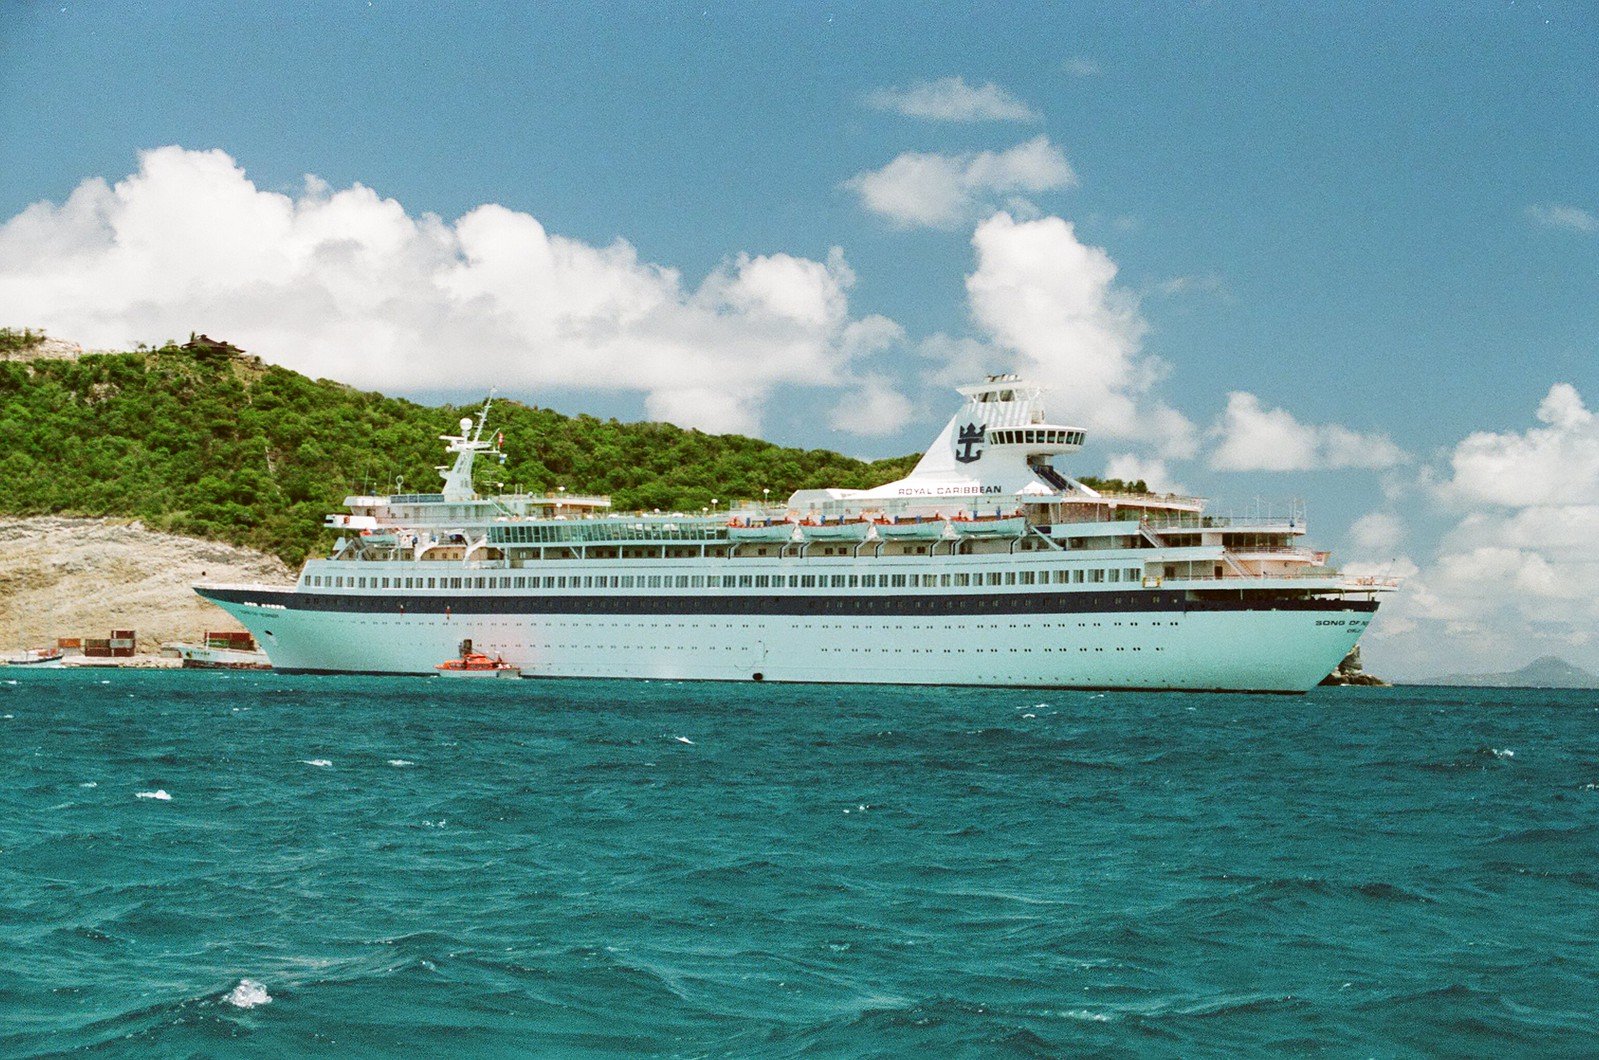 cruise ship with x on stack